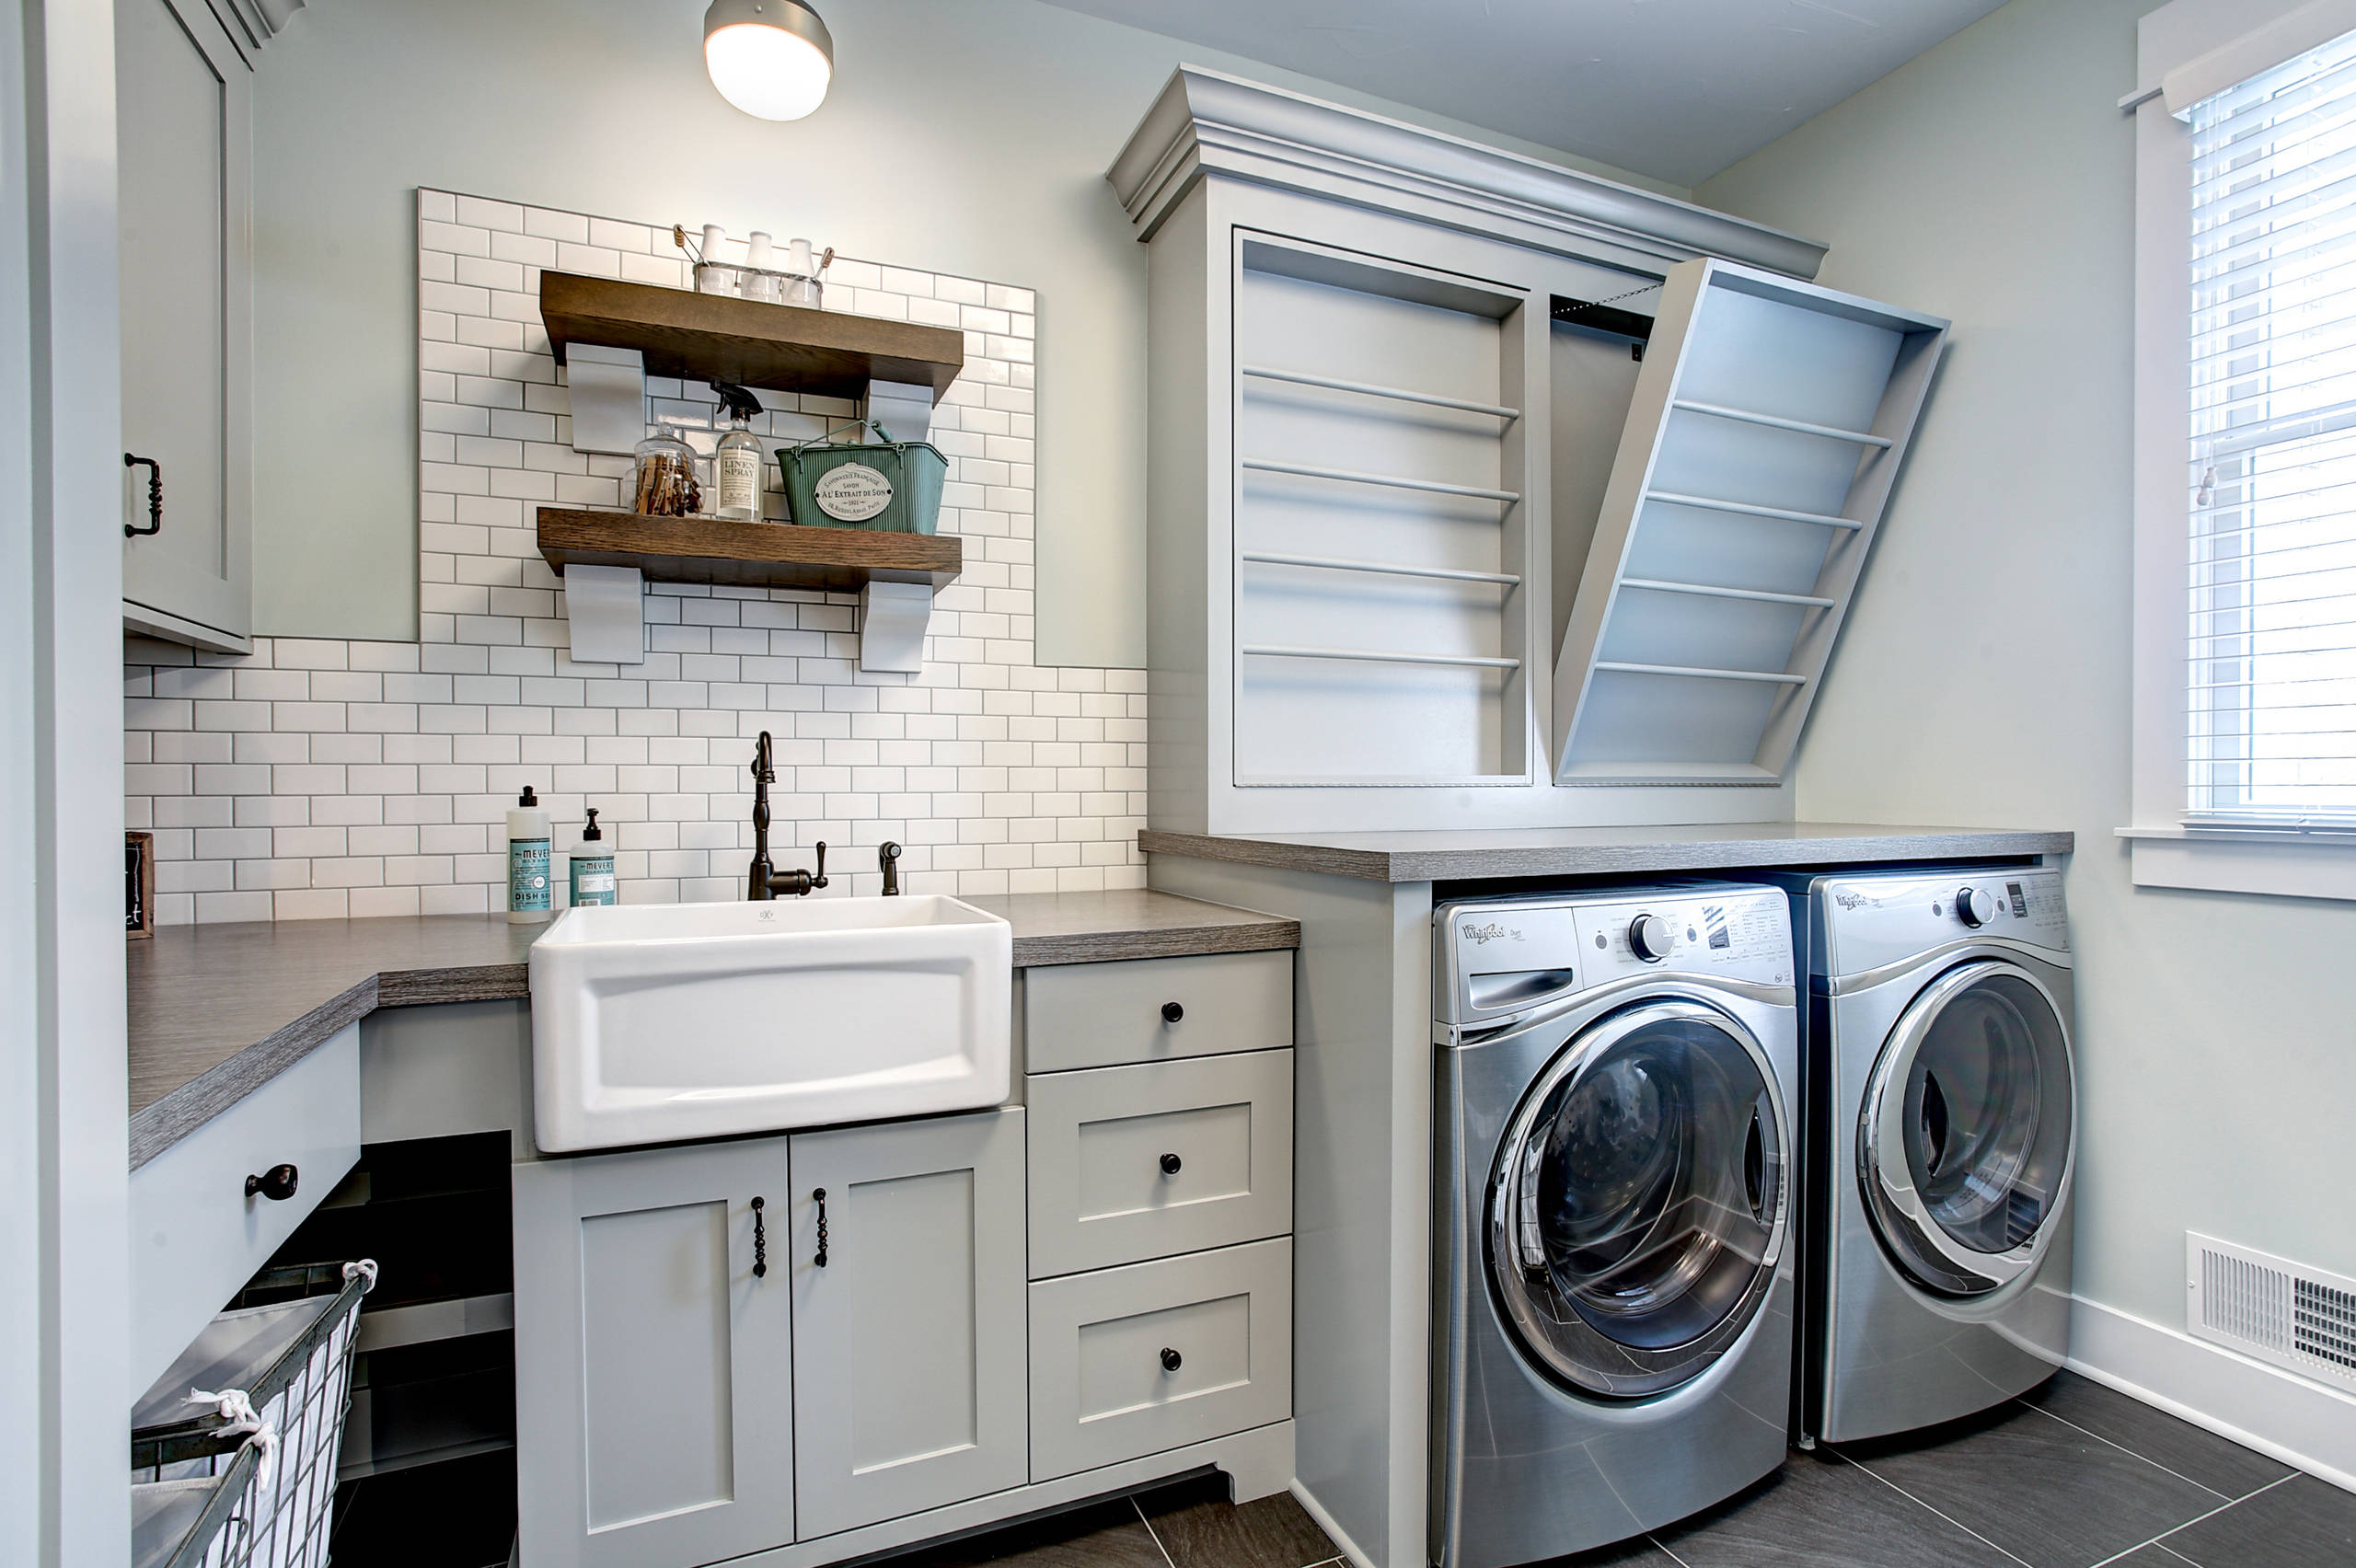 75 Beautiful Laundry Room Pictures Ideas Houzz